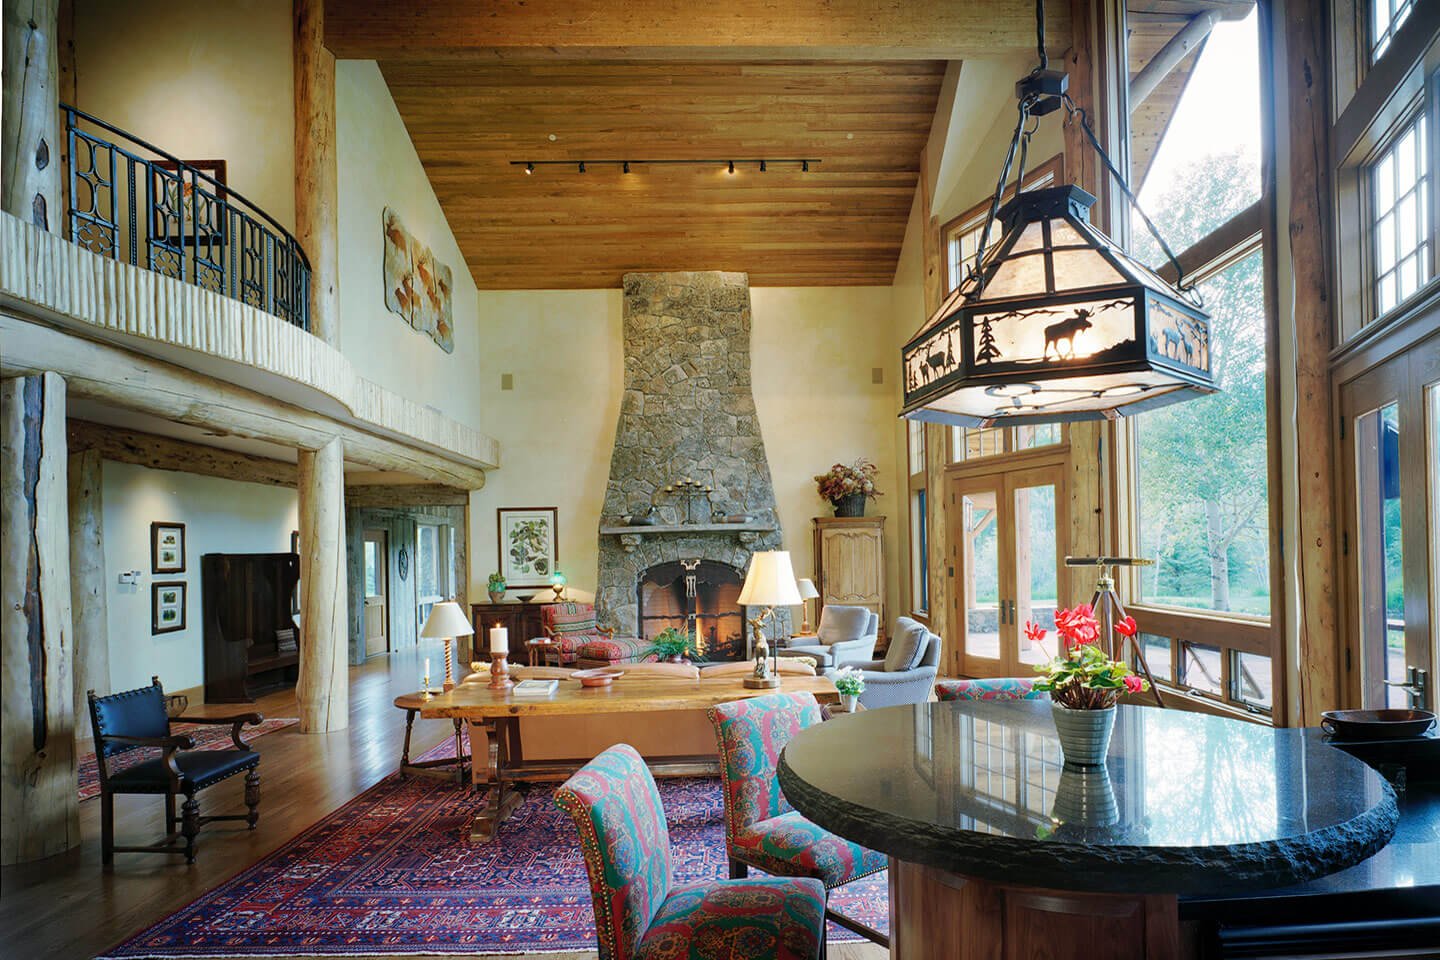 Living room with native stone fireplace and dining room with chandelier